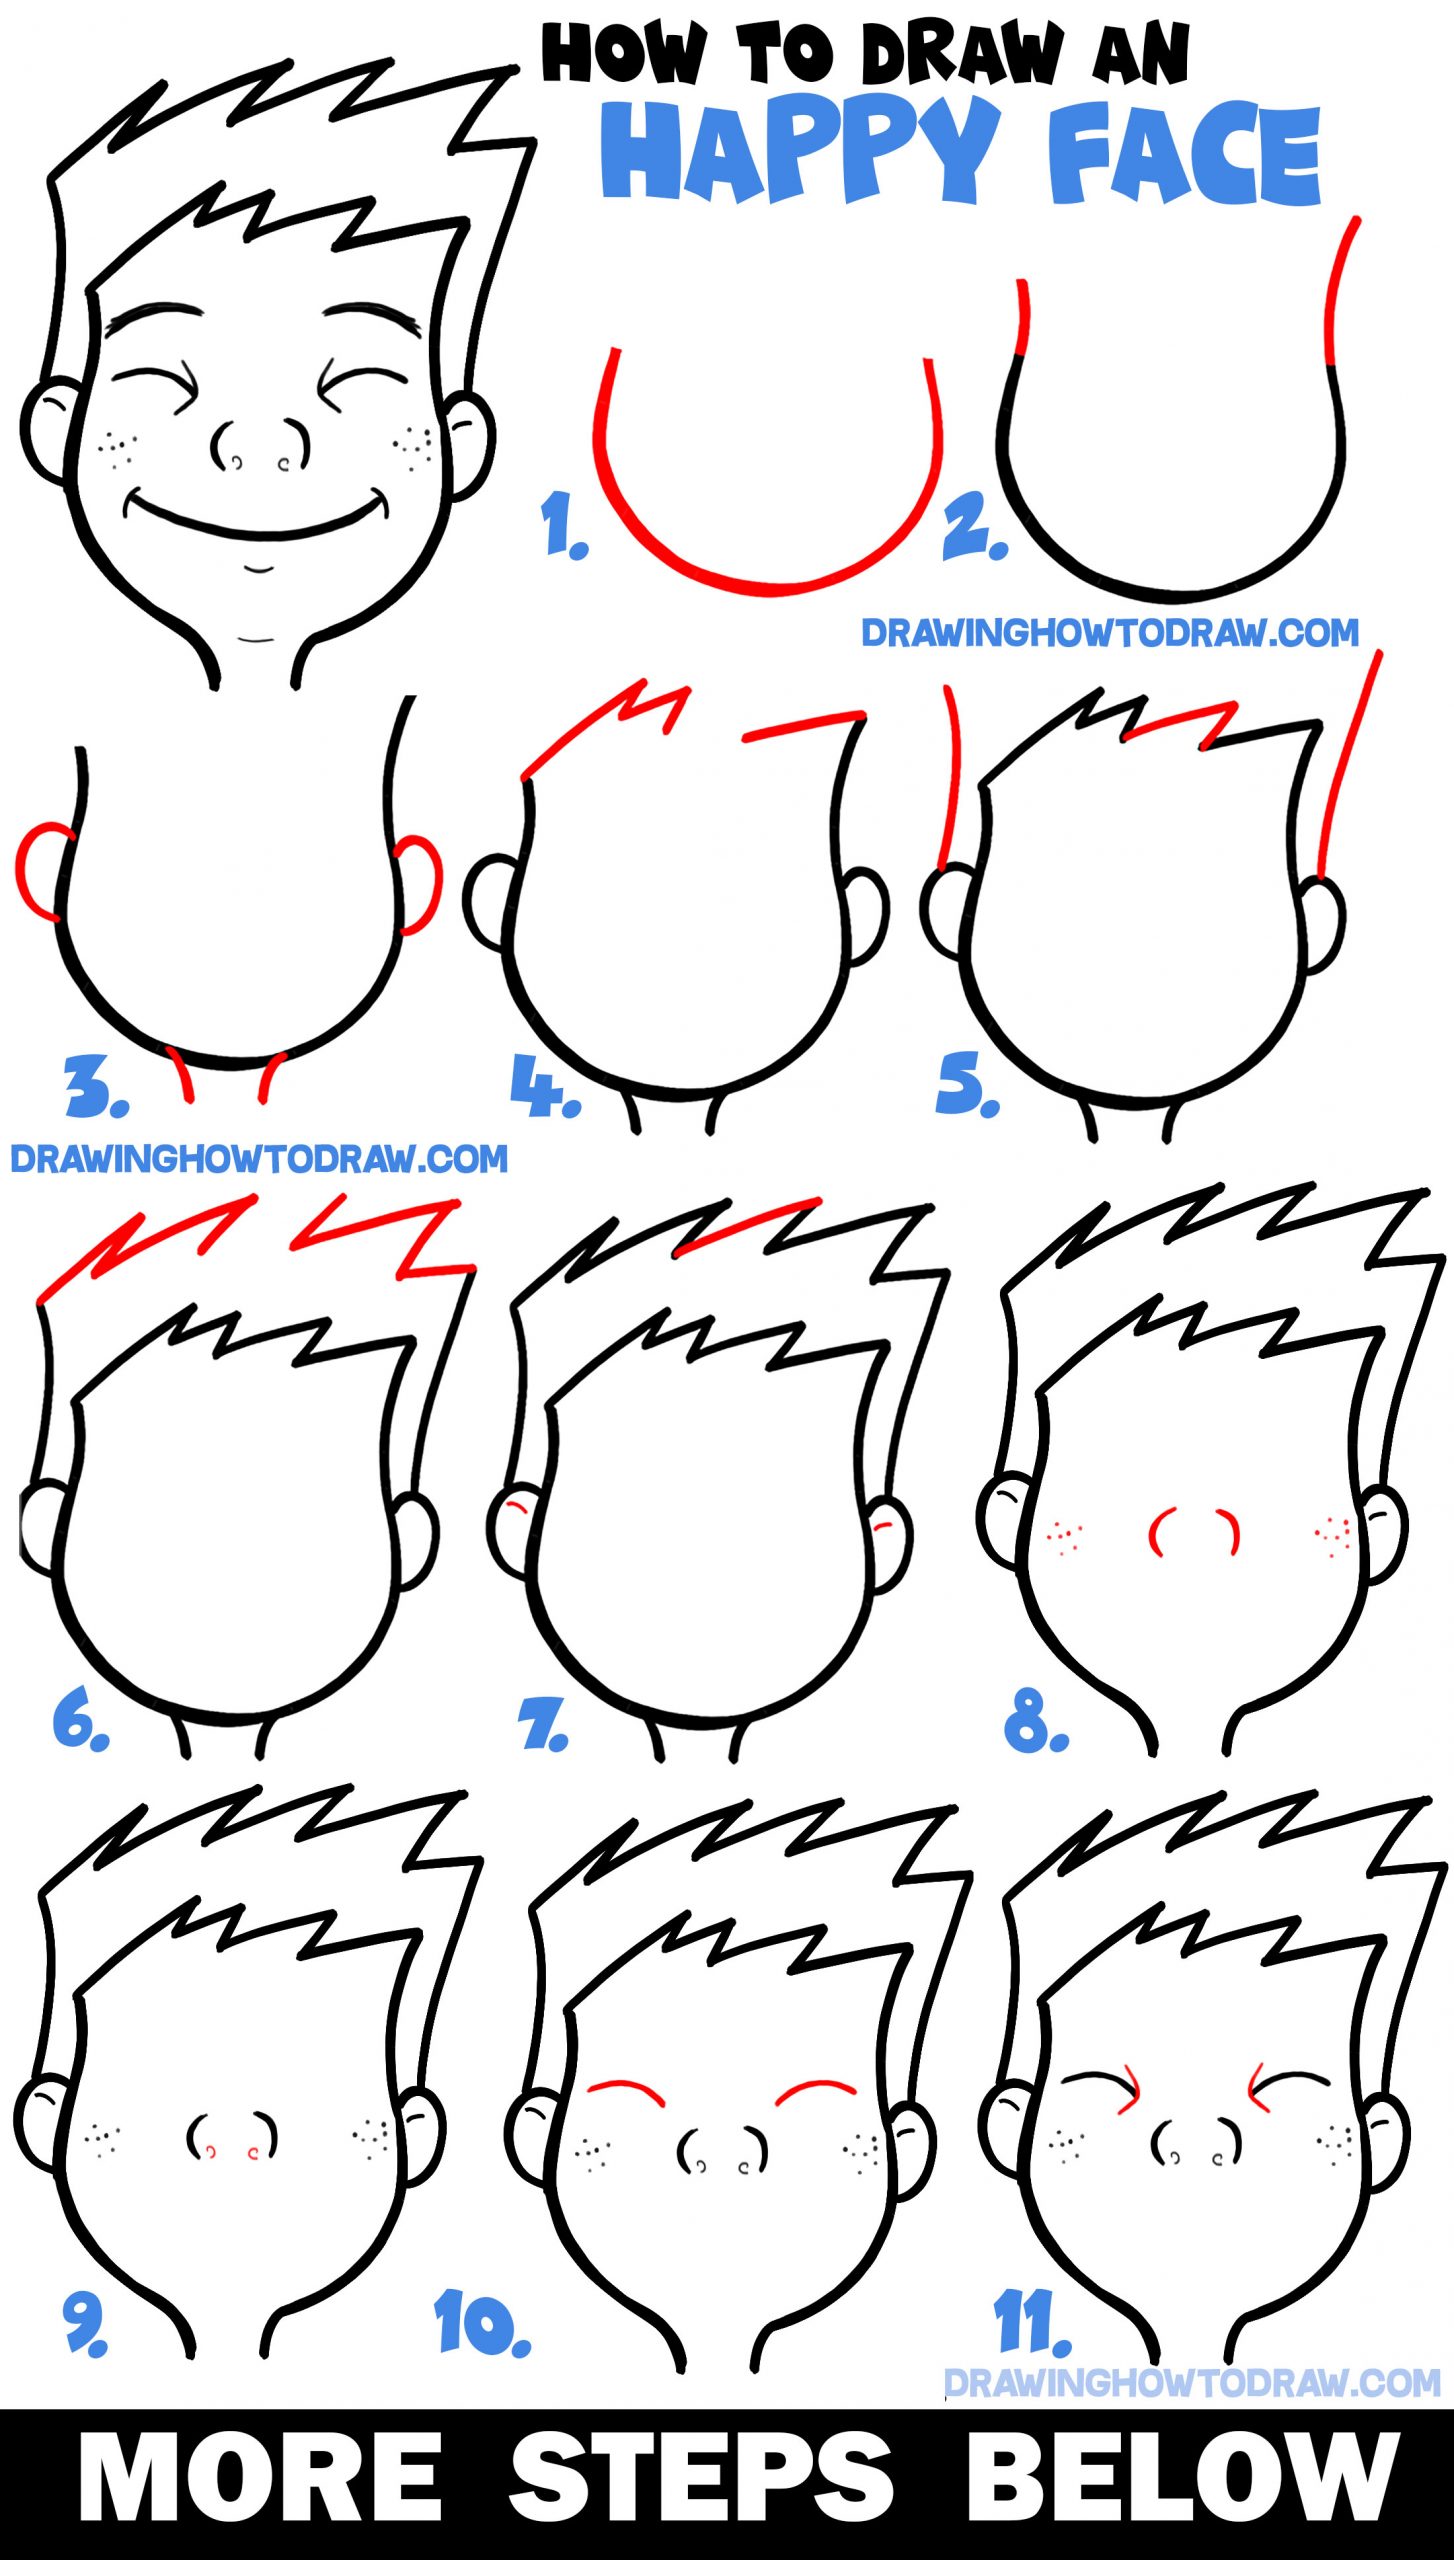 How to Draw Cartoon Facial Expressions : Happy, Smiling, Grinning Ear to Ear